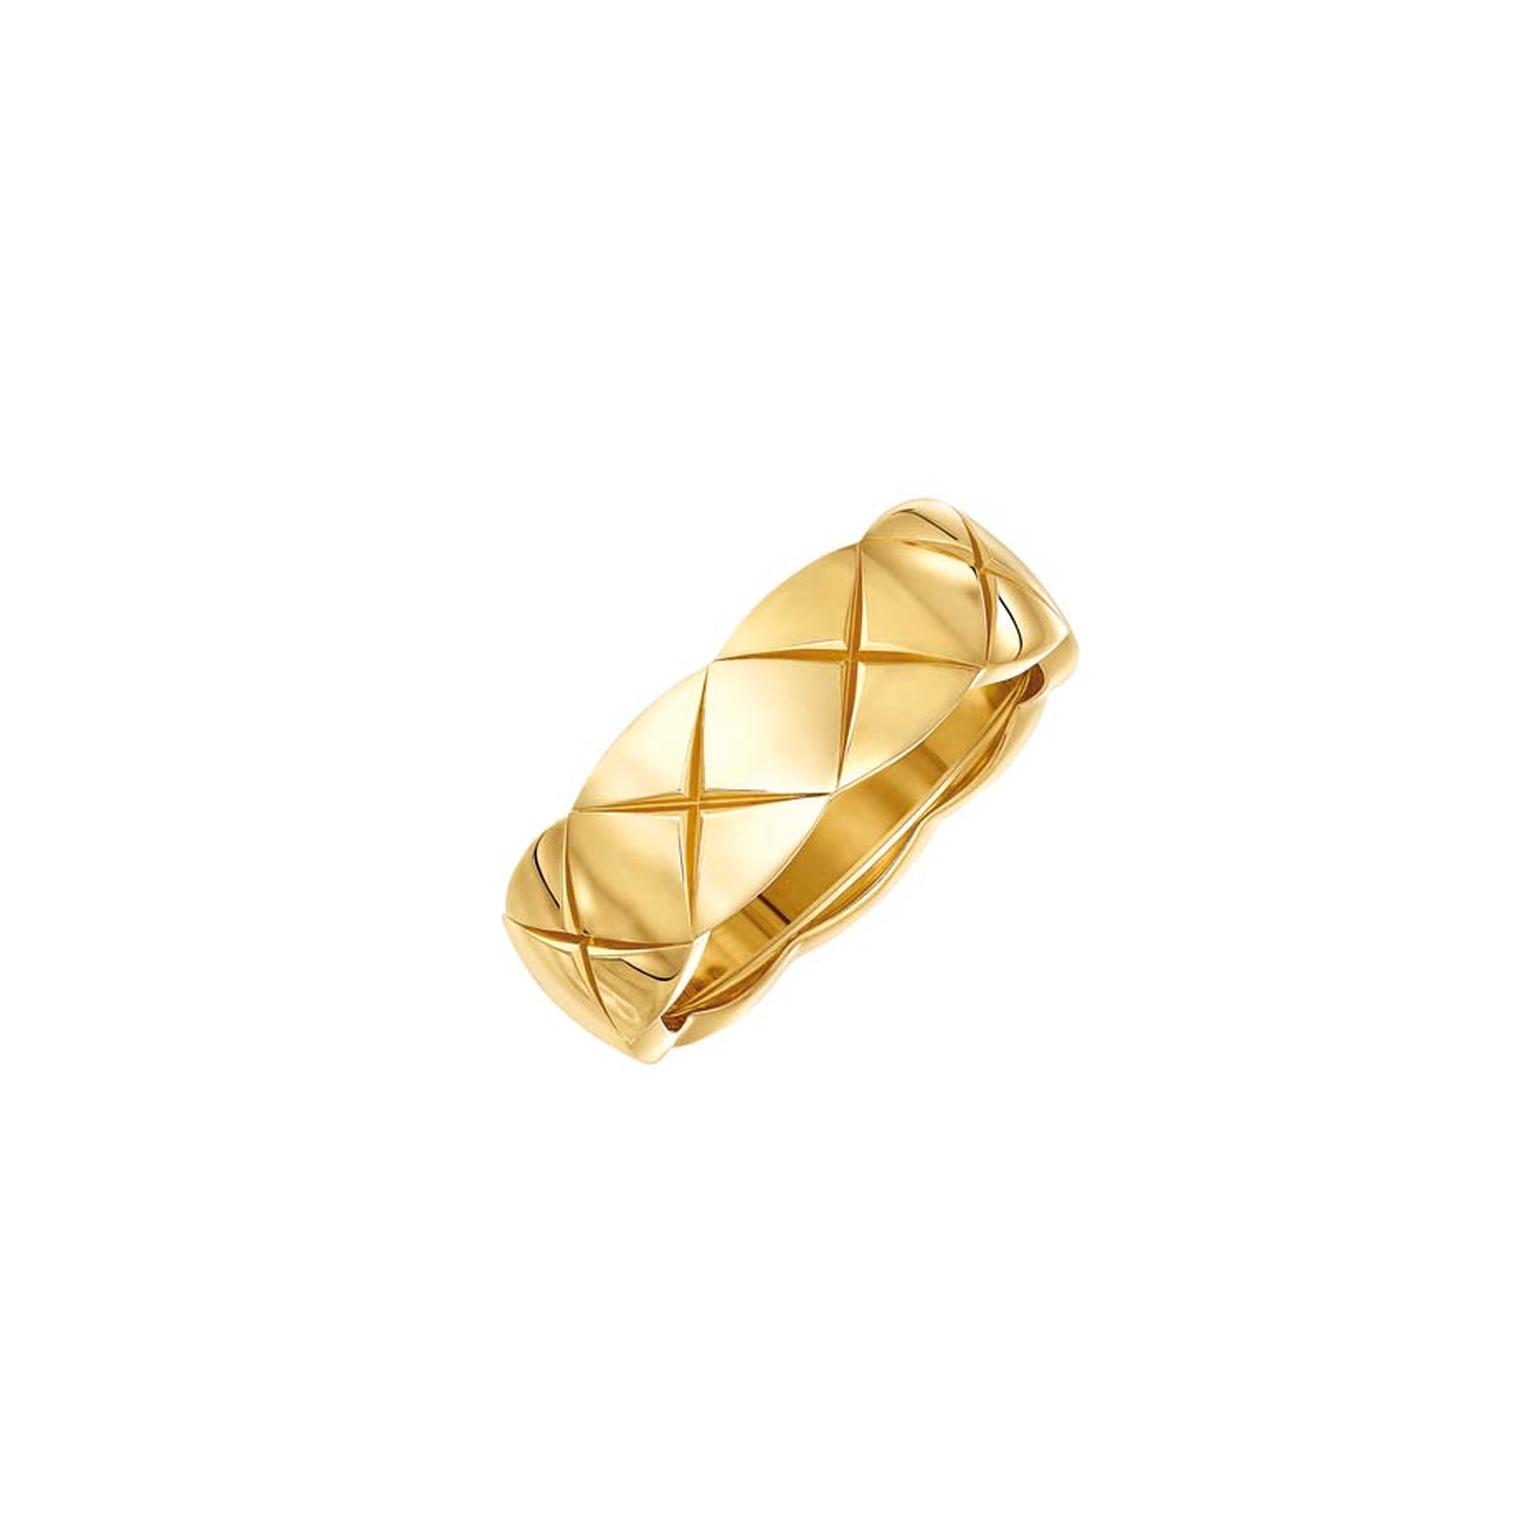 Small Coco Crush gold ring, Net-a-Porter